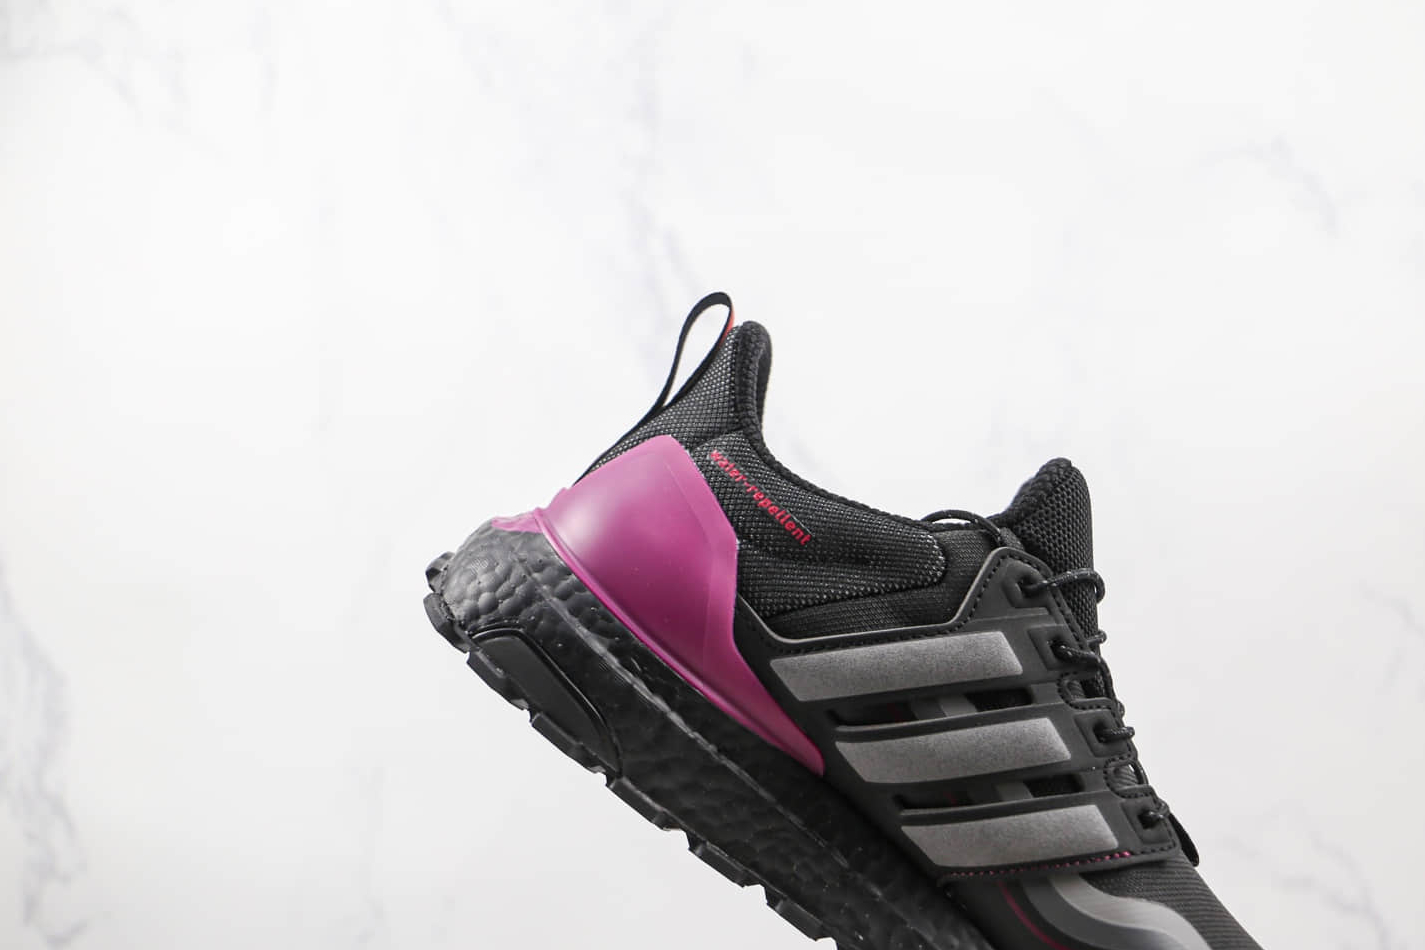 Adidas UltraBoost Cold.RDY DNA 'Black Purple' G54861 - Stylish Performance Footwear for All-Day Comfort